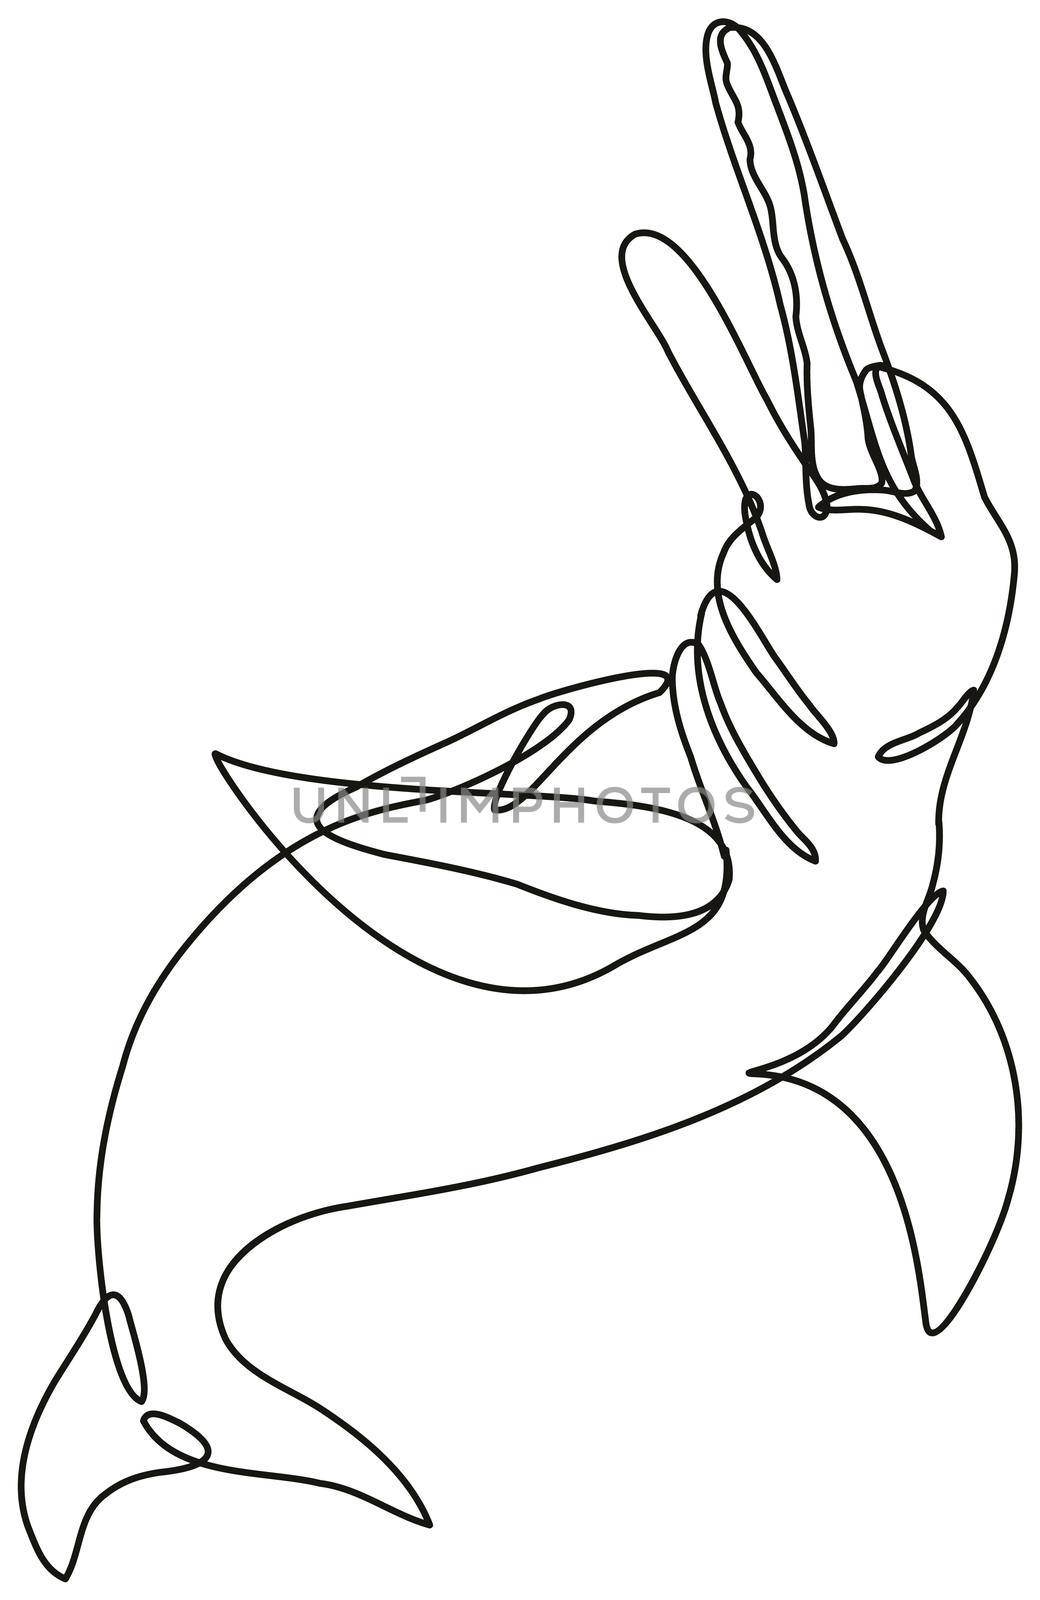 Continuous line drawing illustration of an  Amazon River Dolphin or boto done in mono line or doodle style in black and white on isolated background. 